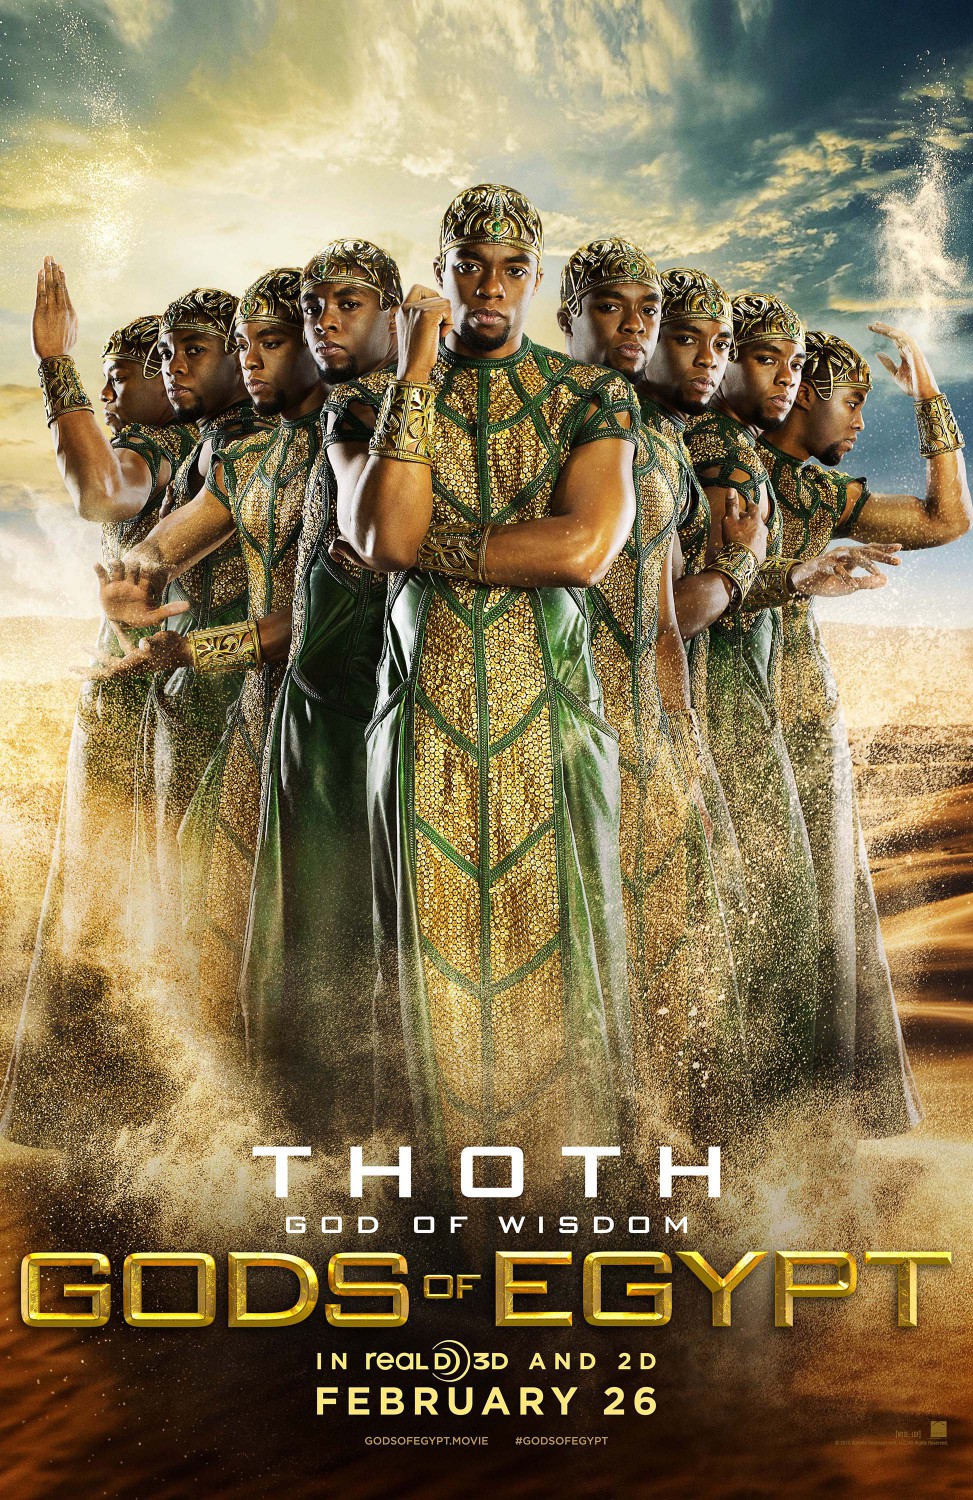 Extra Large Movie Poster Image for Gods of Egypt (#5 of 27)